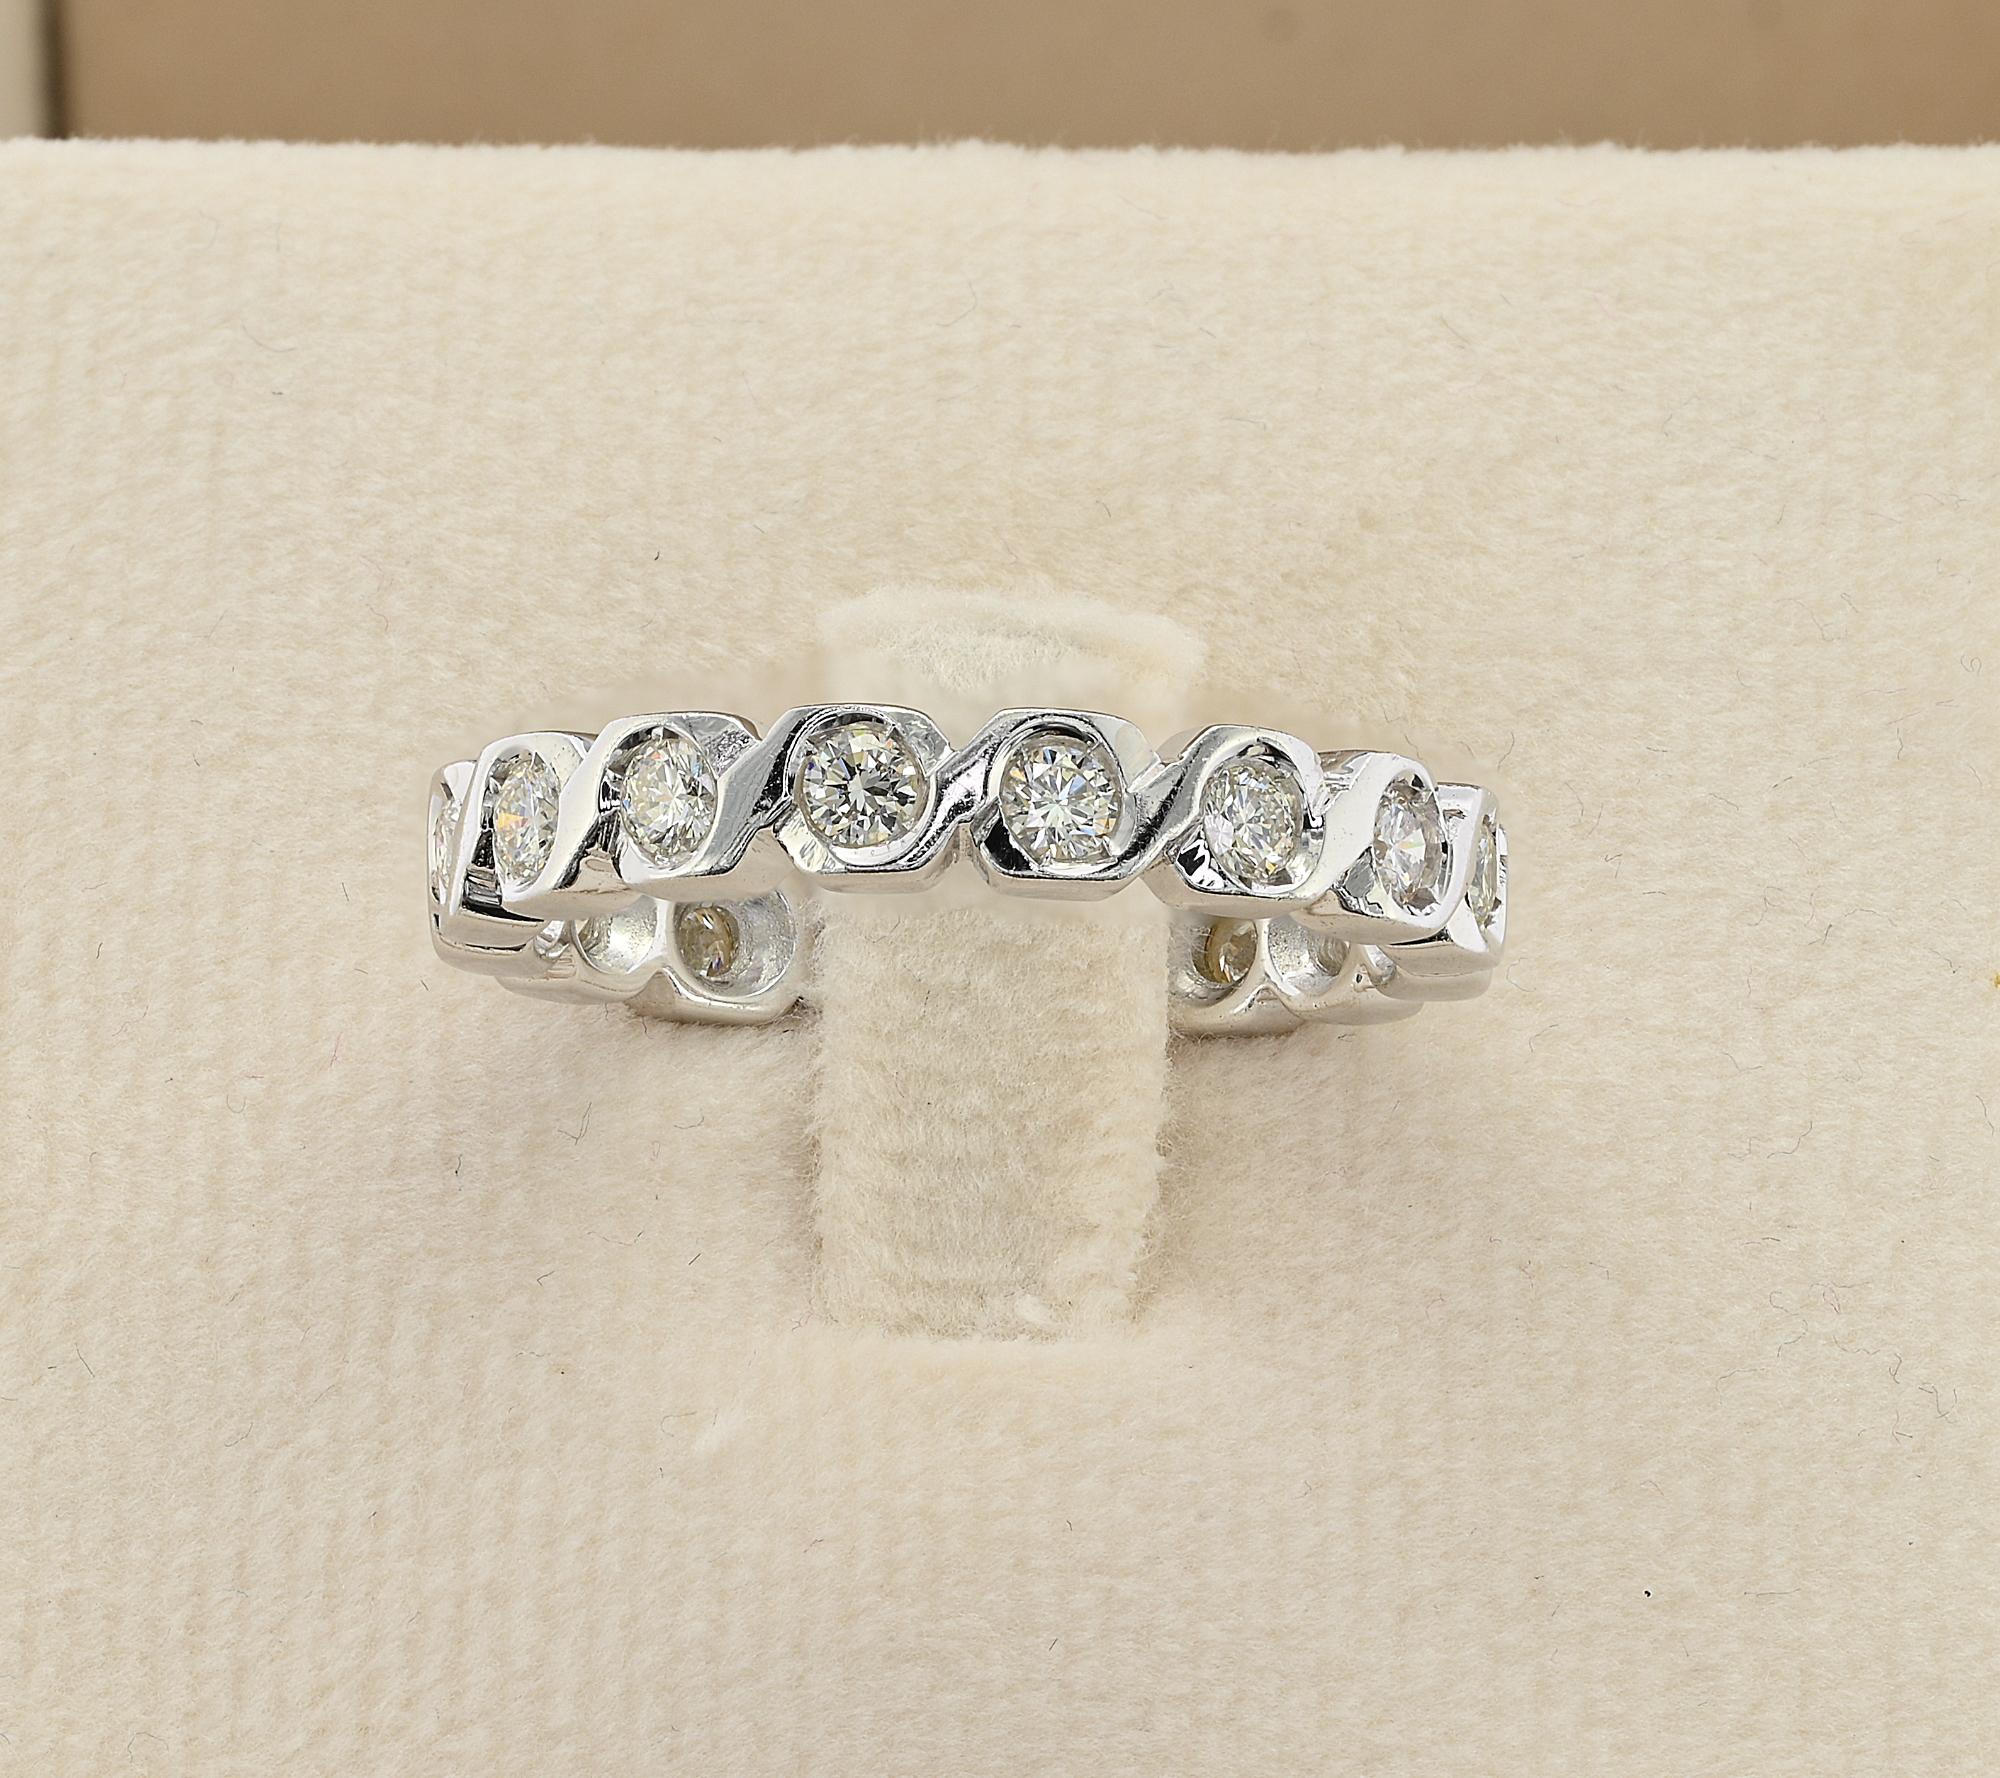 Estate beautiful eternity ring hand crafted of solid 18 KT gold Italian stamps – 1980 circa
Round eight shaped setting hosting a selection of 16 bright white brilliant cut Diamonds rated F/G VS totaling .80 carats projecting great sparkle